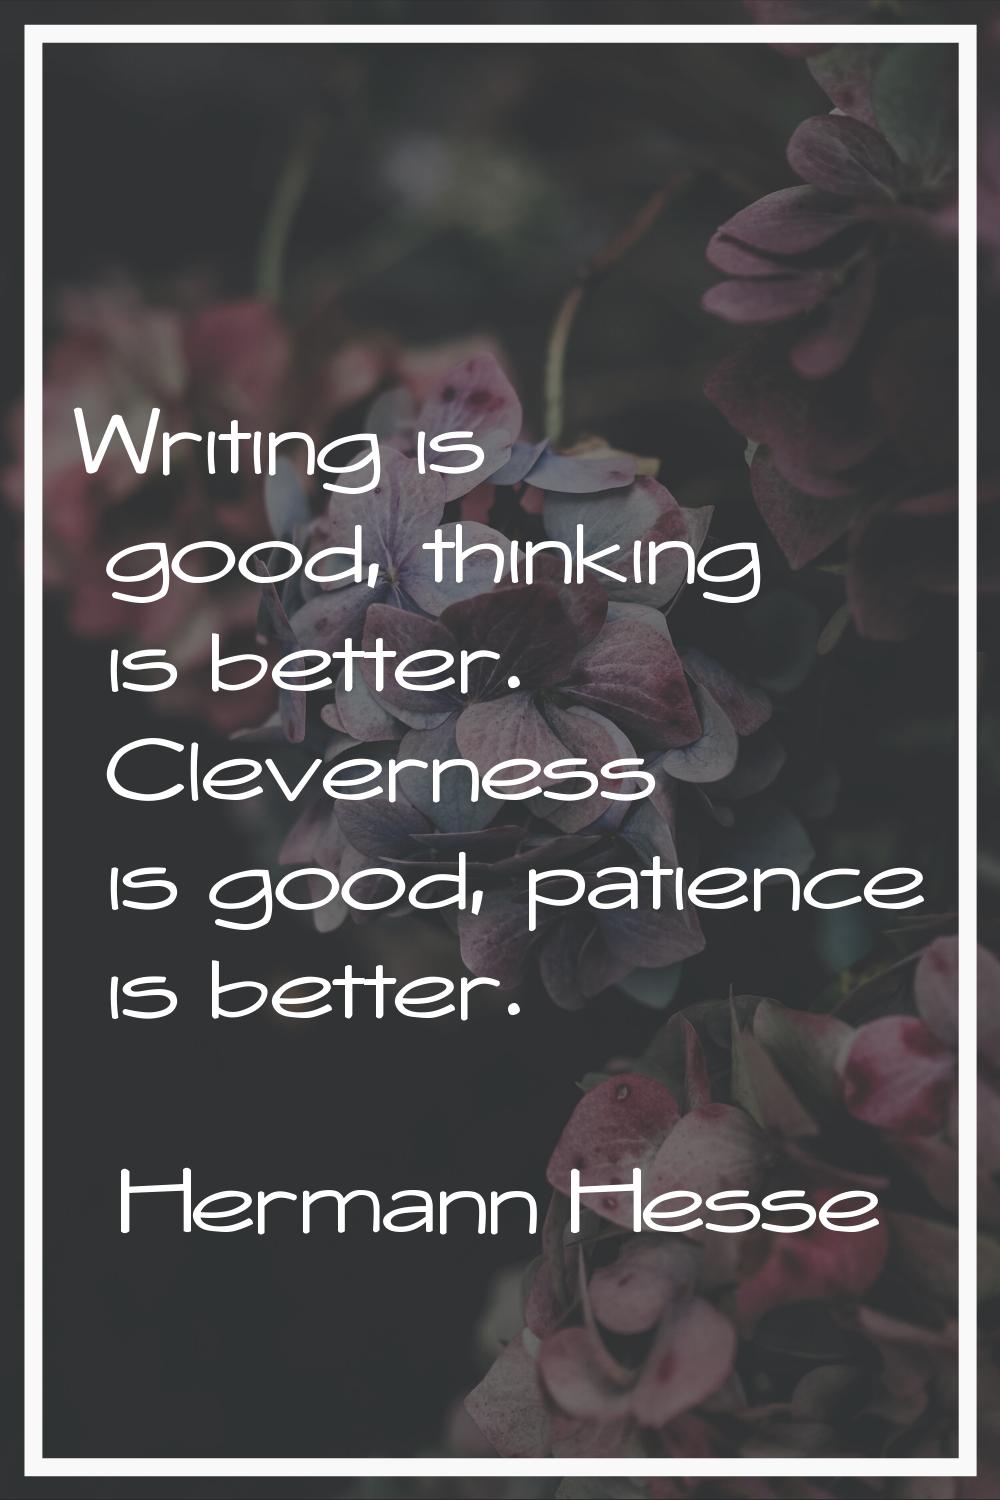 Writing is good, thinking is better. Cleverness is good, patience is better.